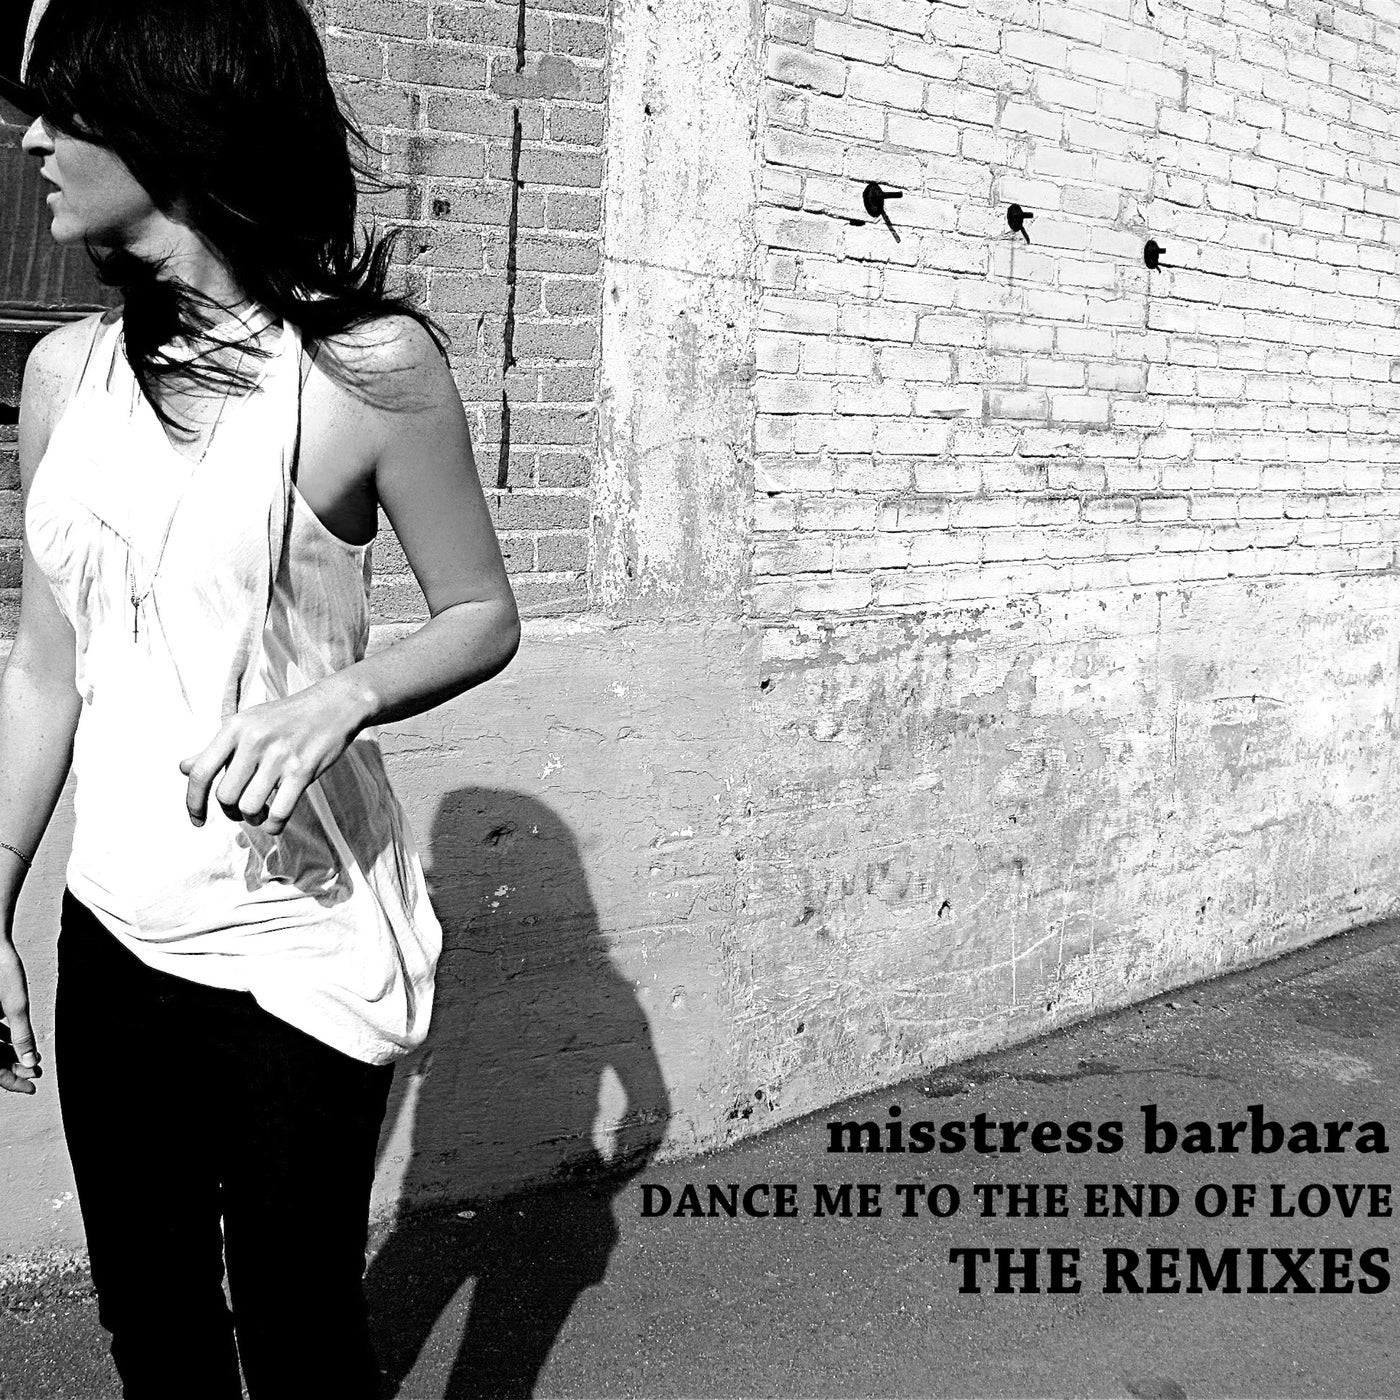 Dance Me to the End of Love Remixes